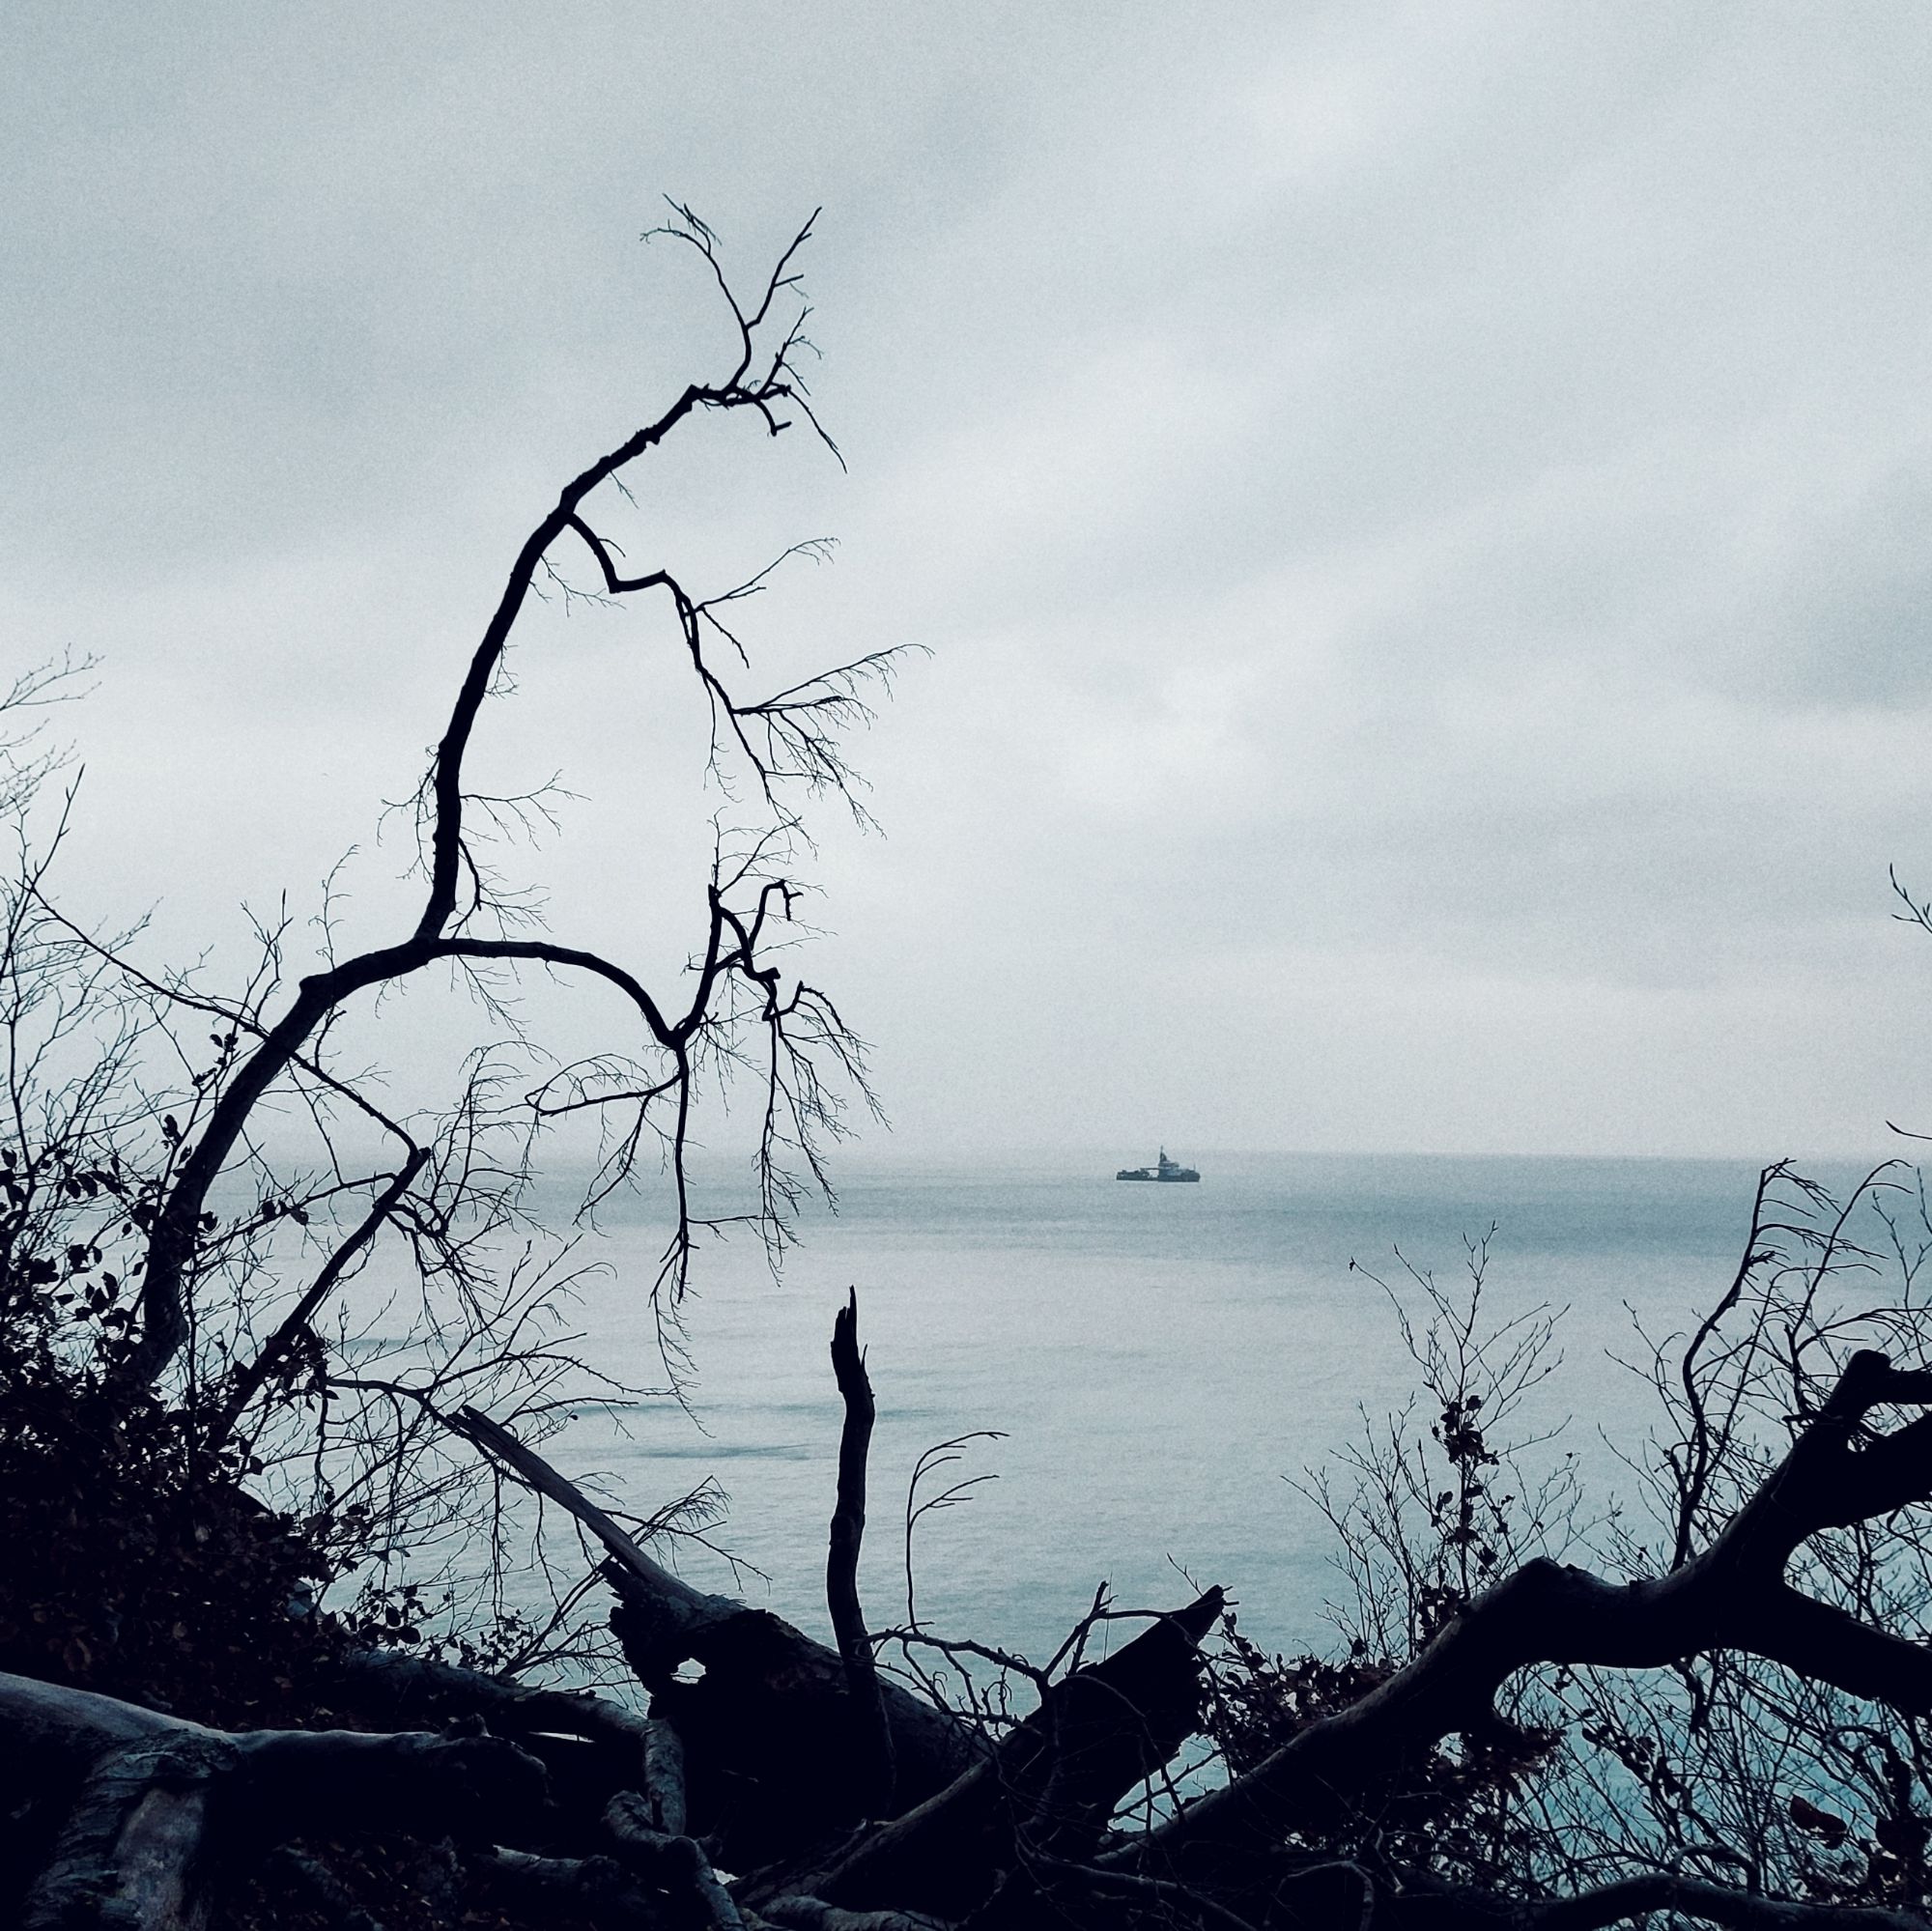 A ship on a quiet sea, behind a dark shoreline and old trees.